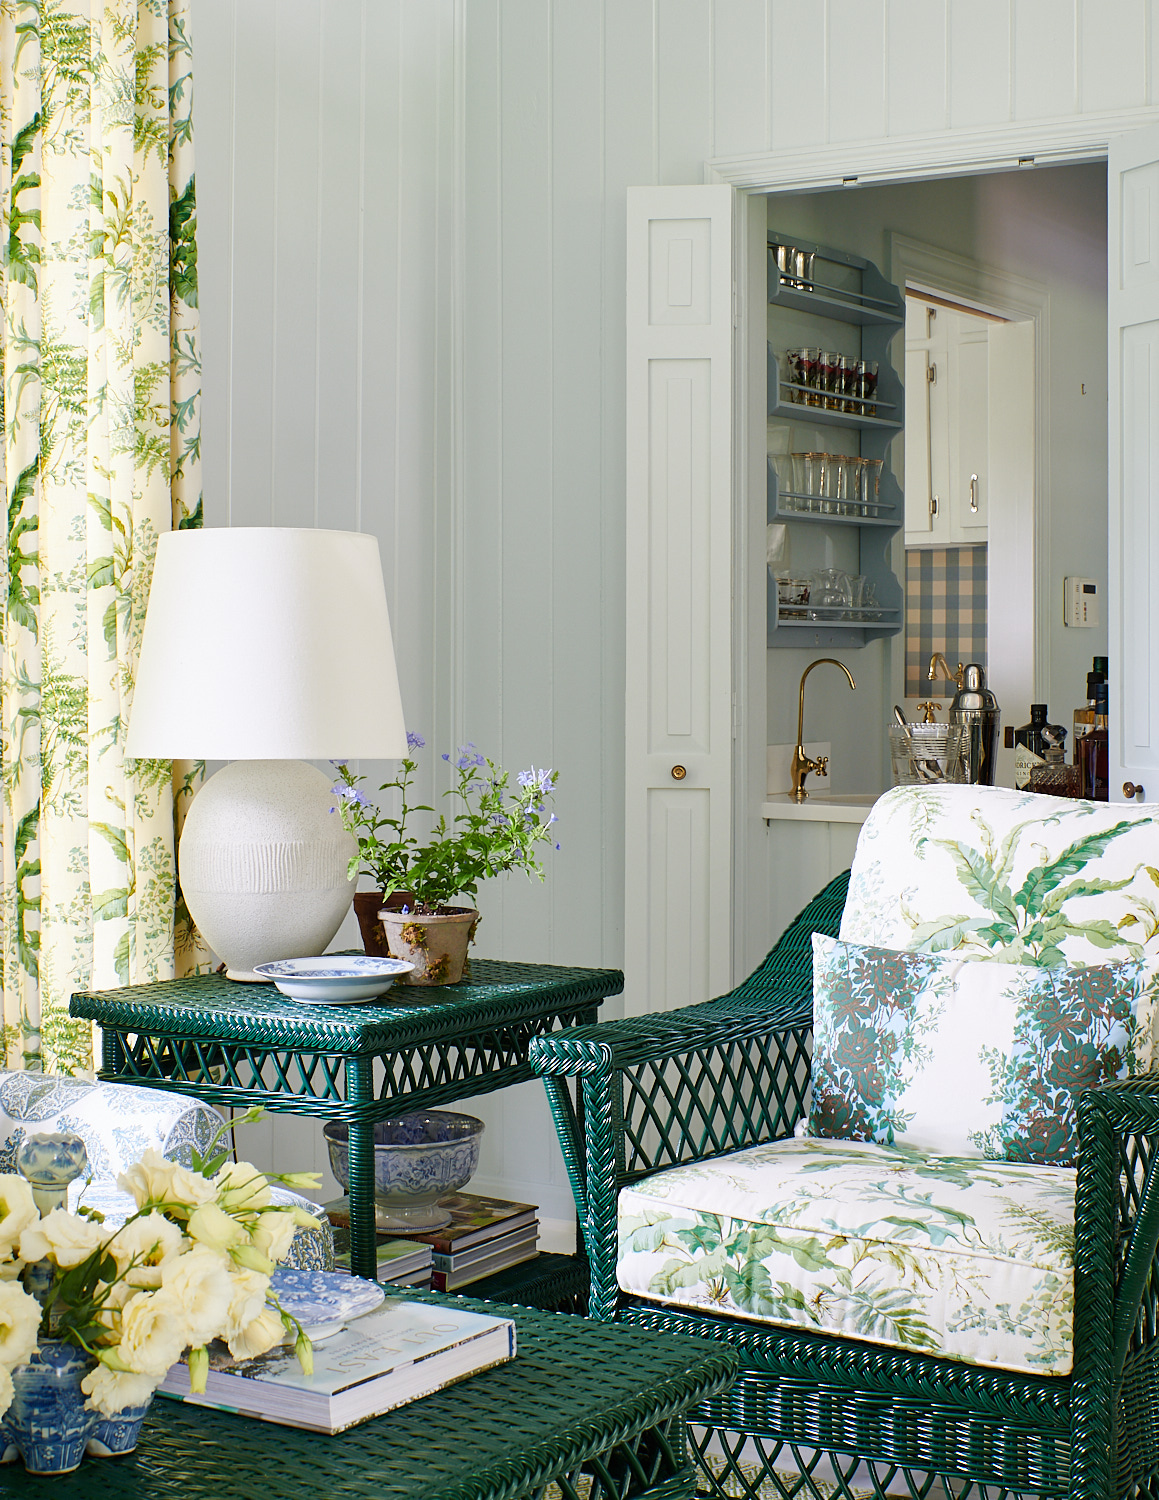 Wide view sun room with floral roman shades, wicker tea chairs with matching cushions and ottomans